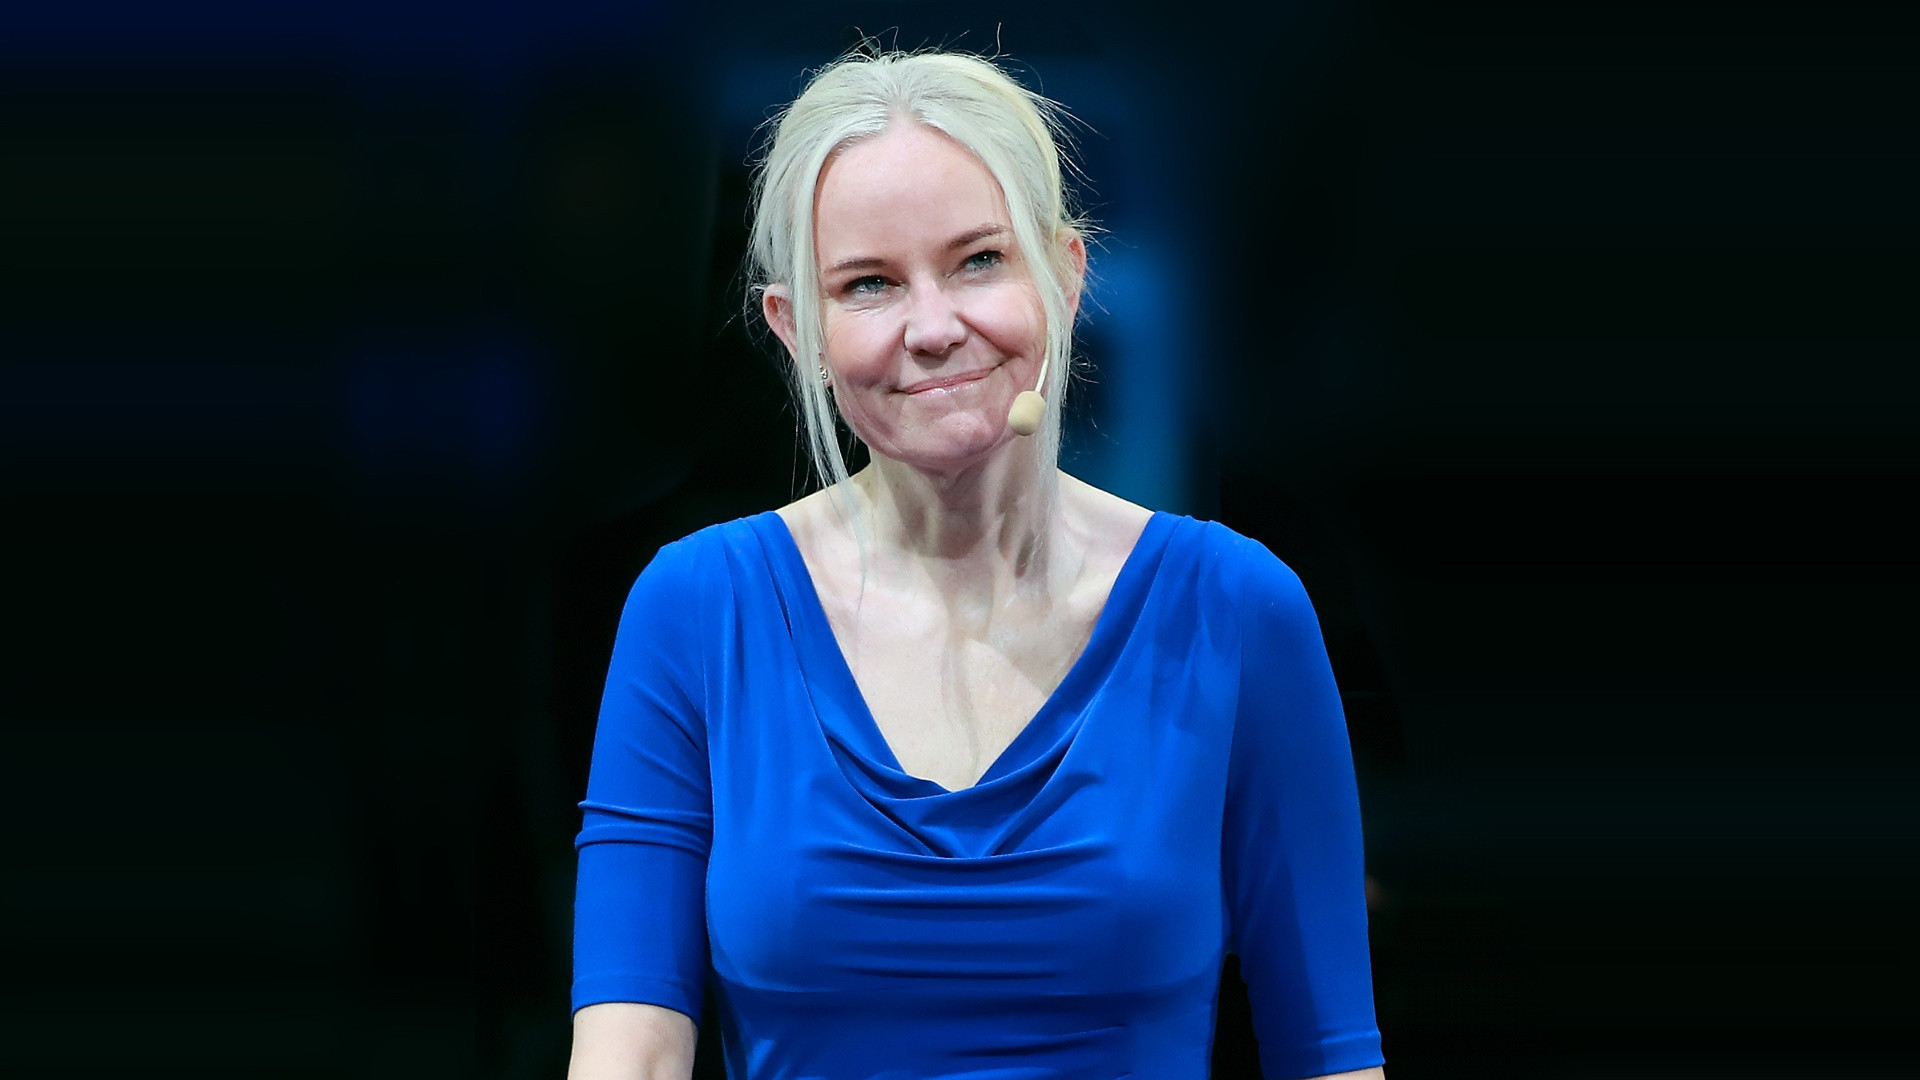 Petra Sörling has become the first female President of the International Table Tennis Federation ©ITTF